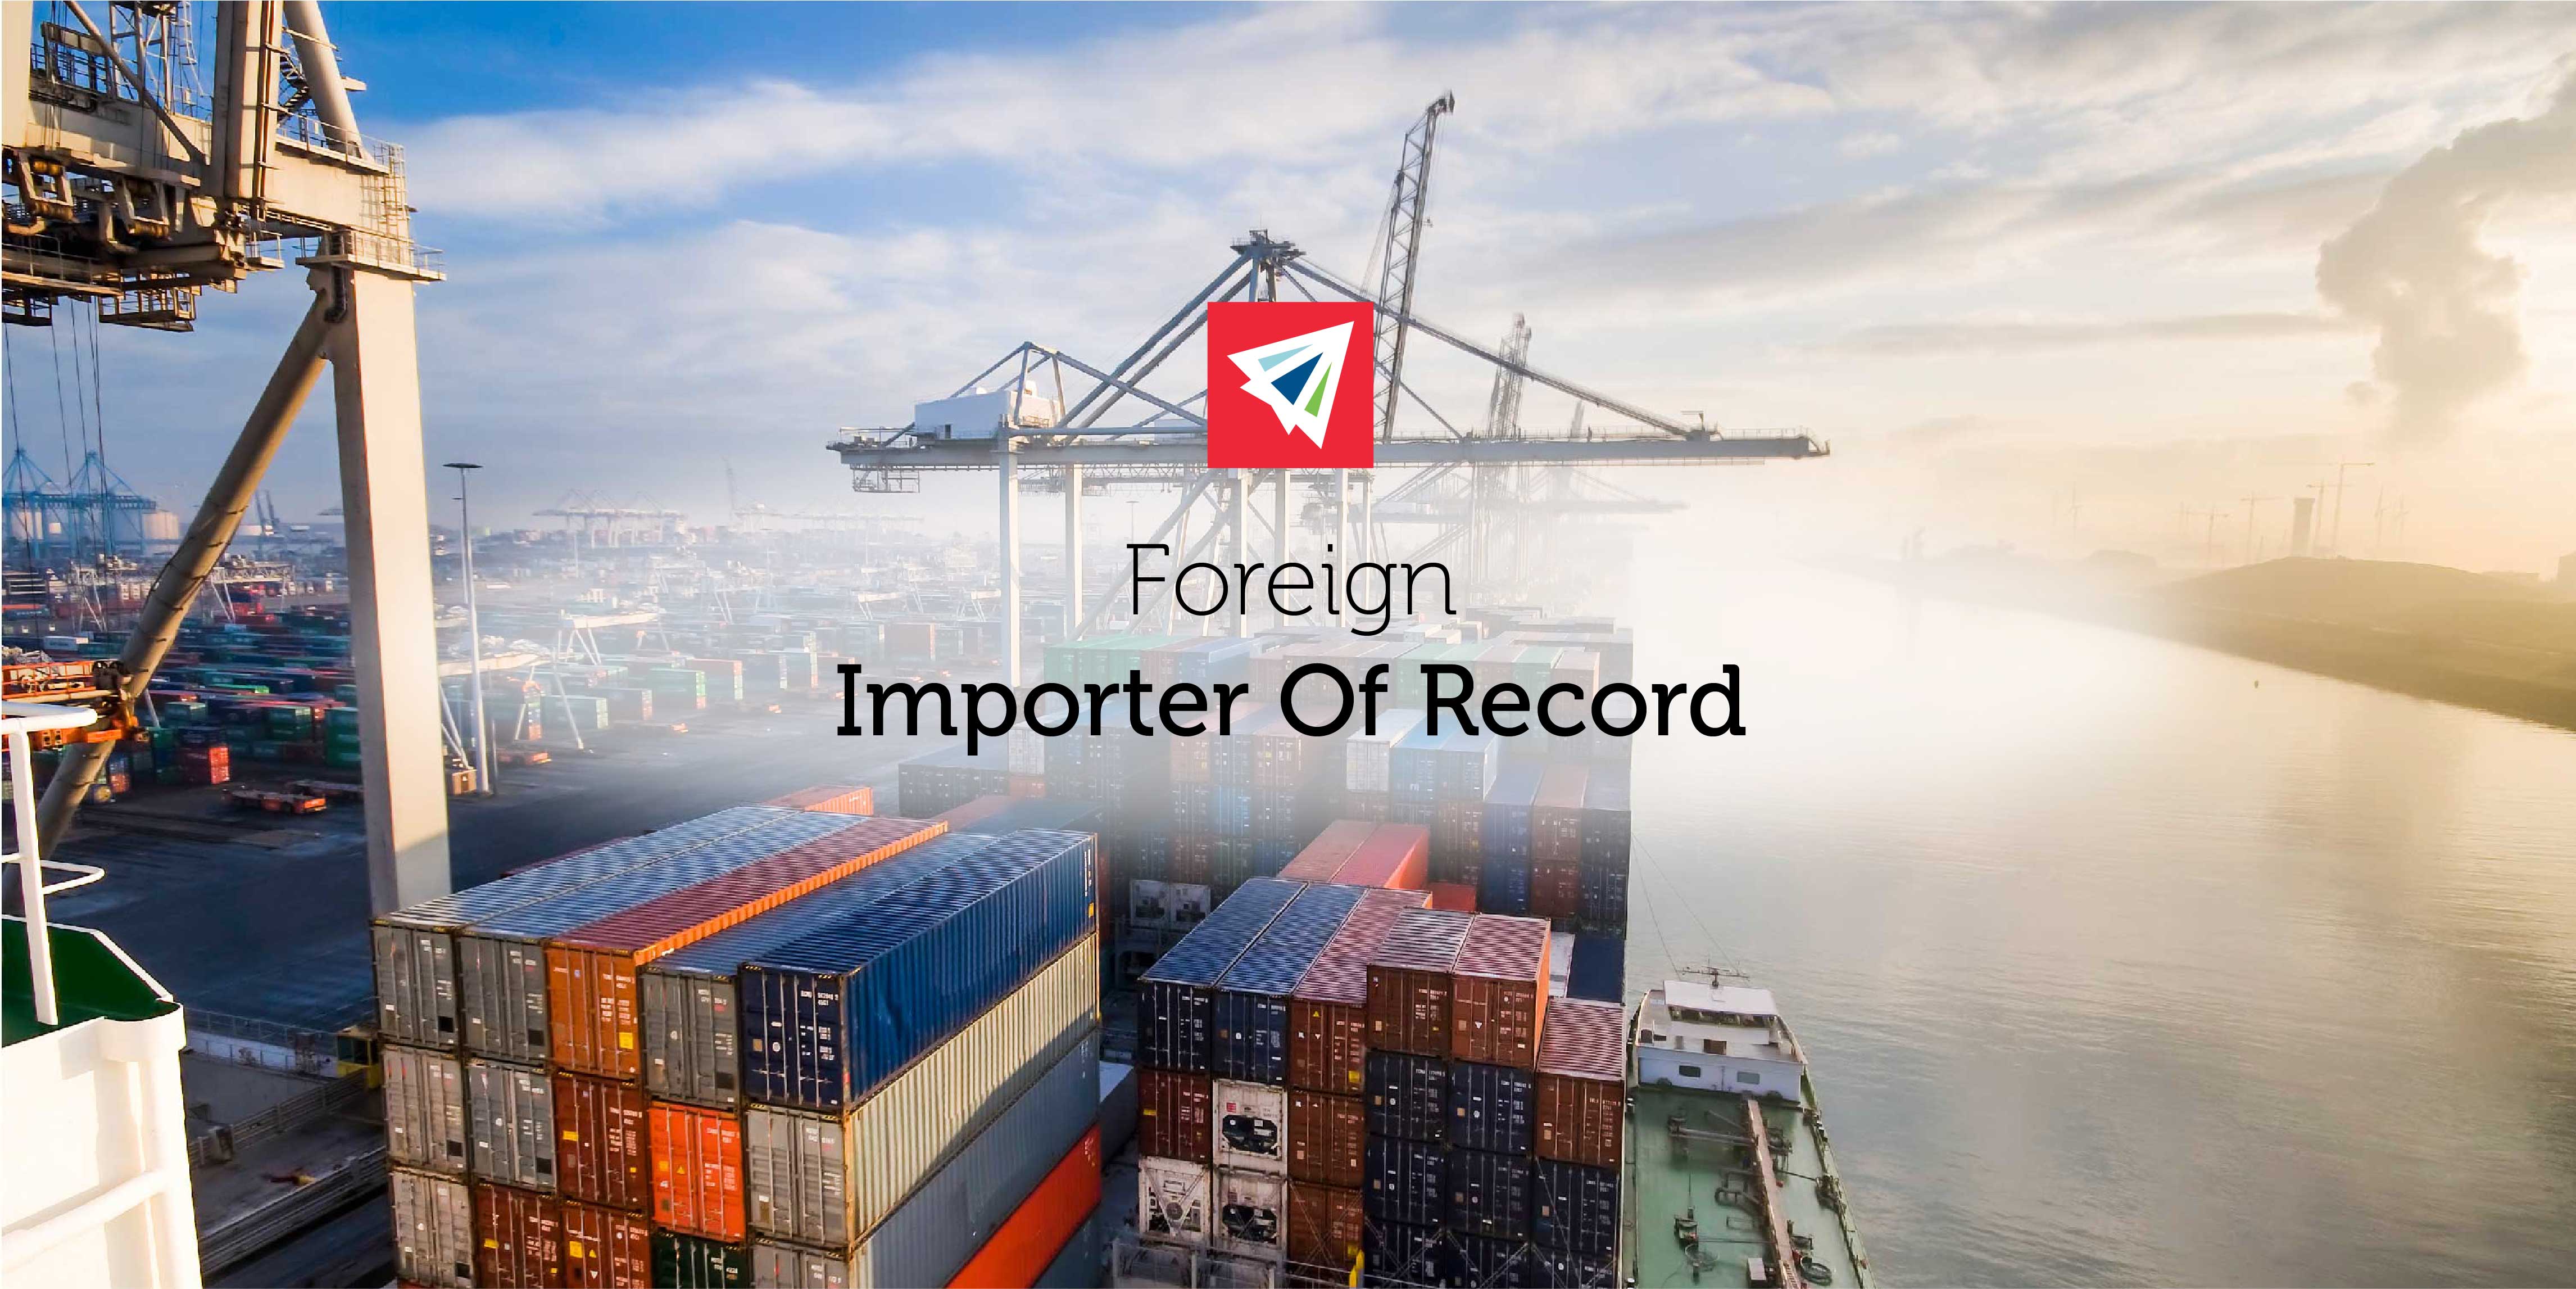 Importer Of Record